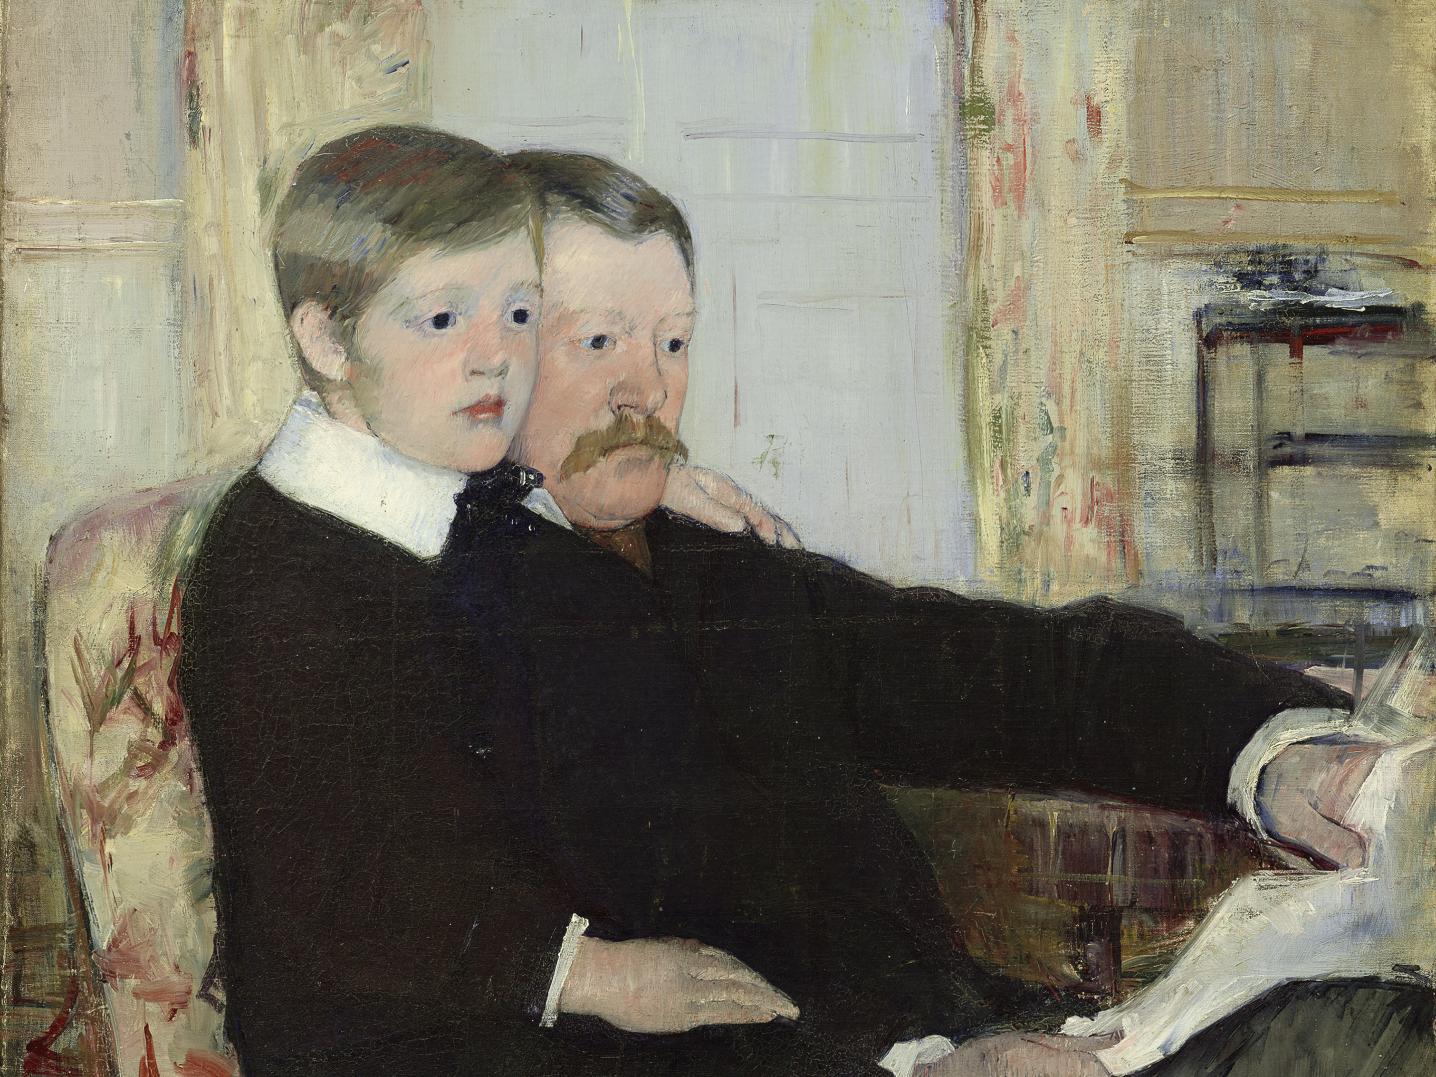 Mary Cassat, Portrait of Alexander J. Cassat and his son, Robert Kelso Cassat, 1884, Oil on canvas, 100.3 x 81.3 cm. Philadelphia Museum of Art; Purchased with the W.P. Wilstach Fund and with funds contributed by Mrs. William Coxe Wright, 1959